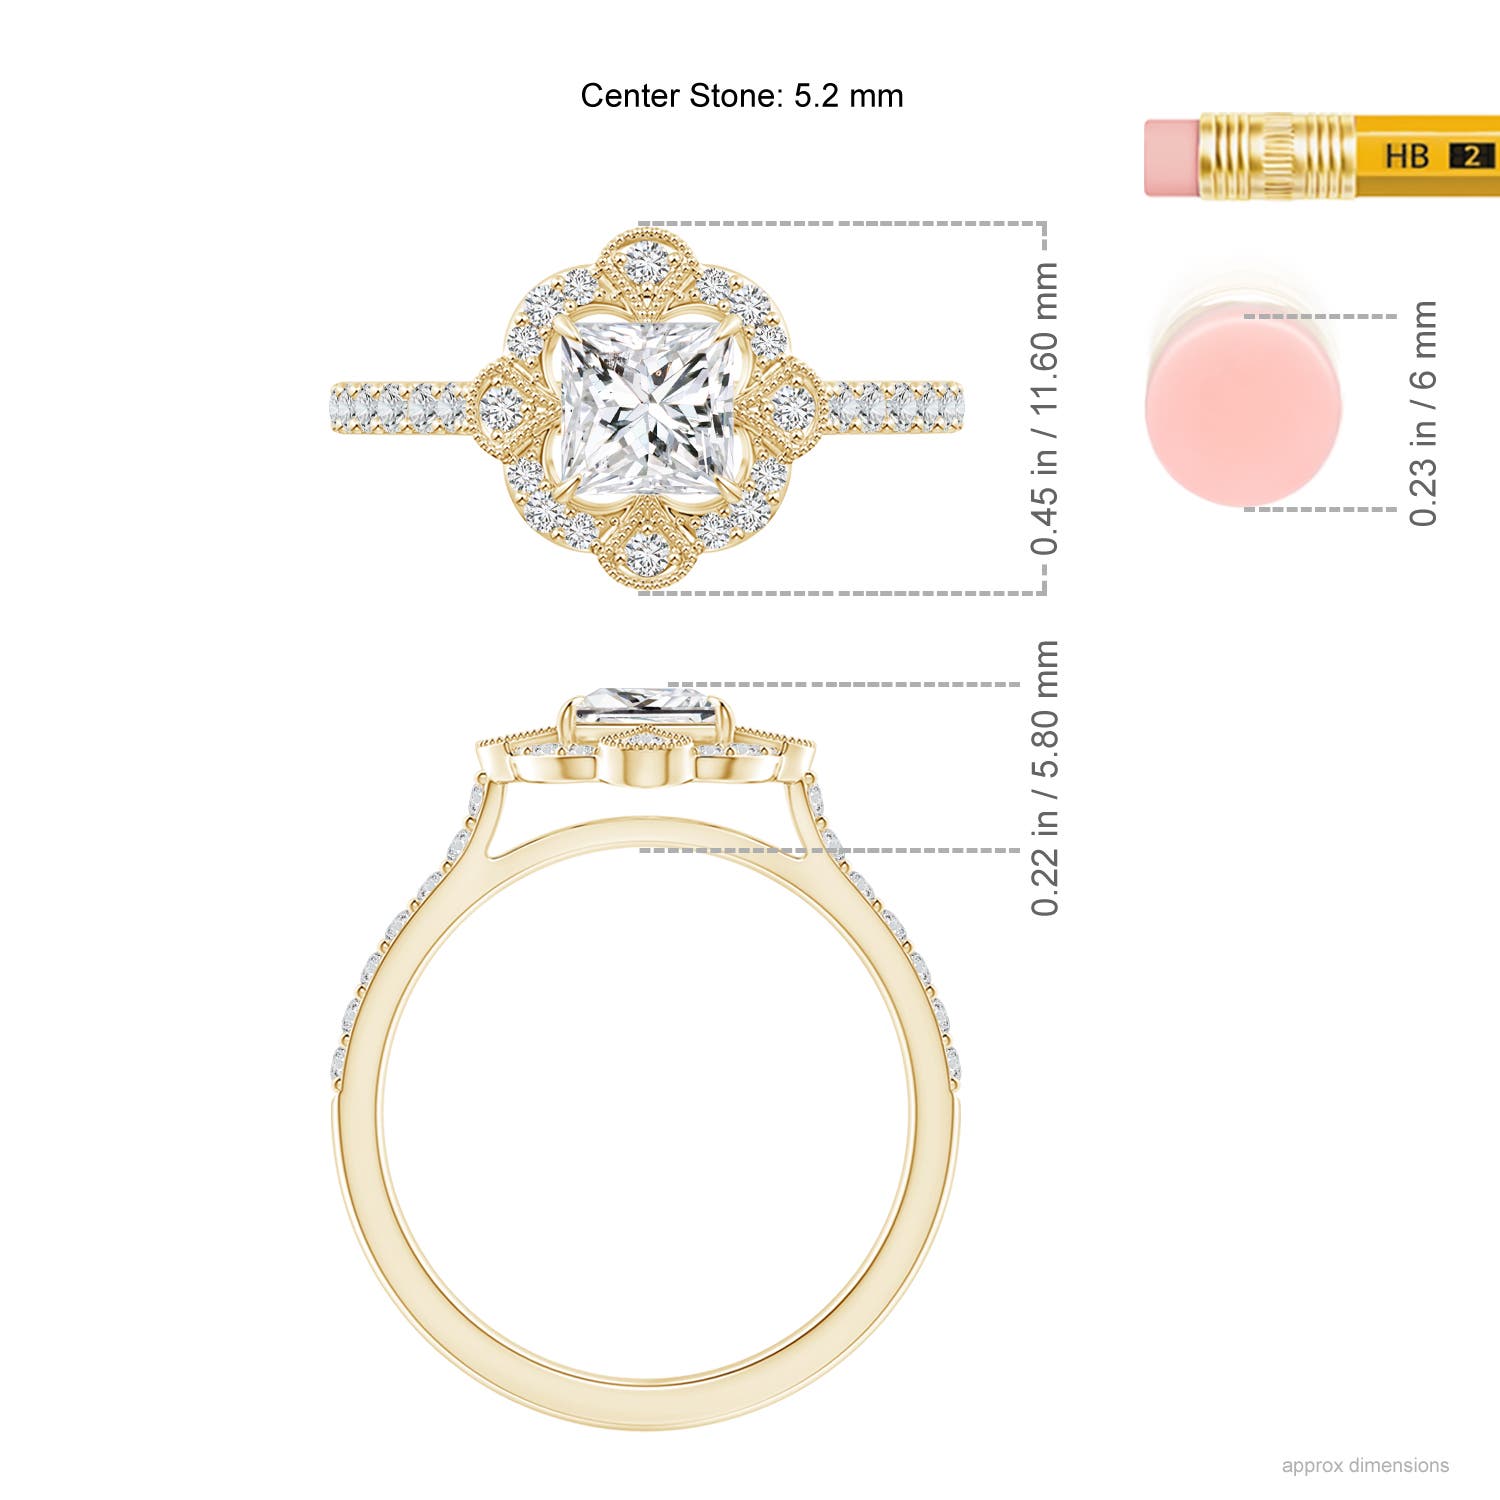 H, SI2 / 1.17 CT / 14 KT Yellow Gold